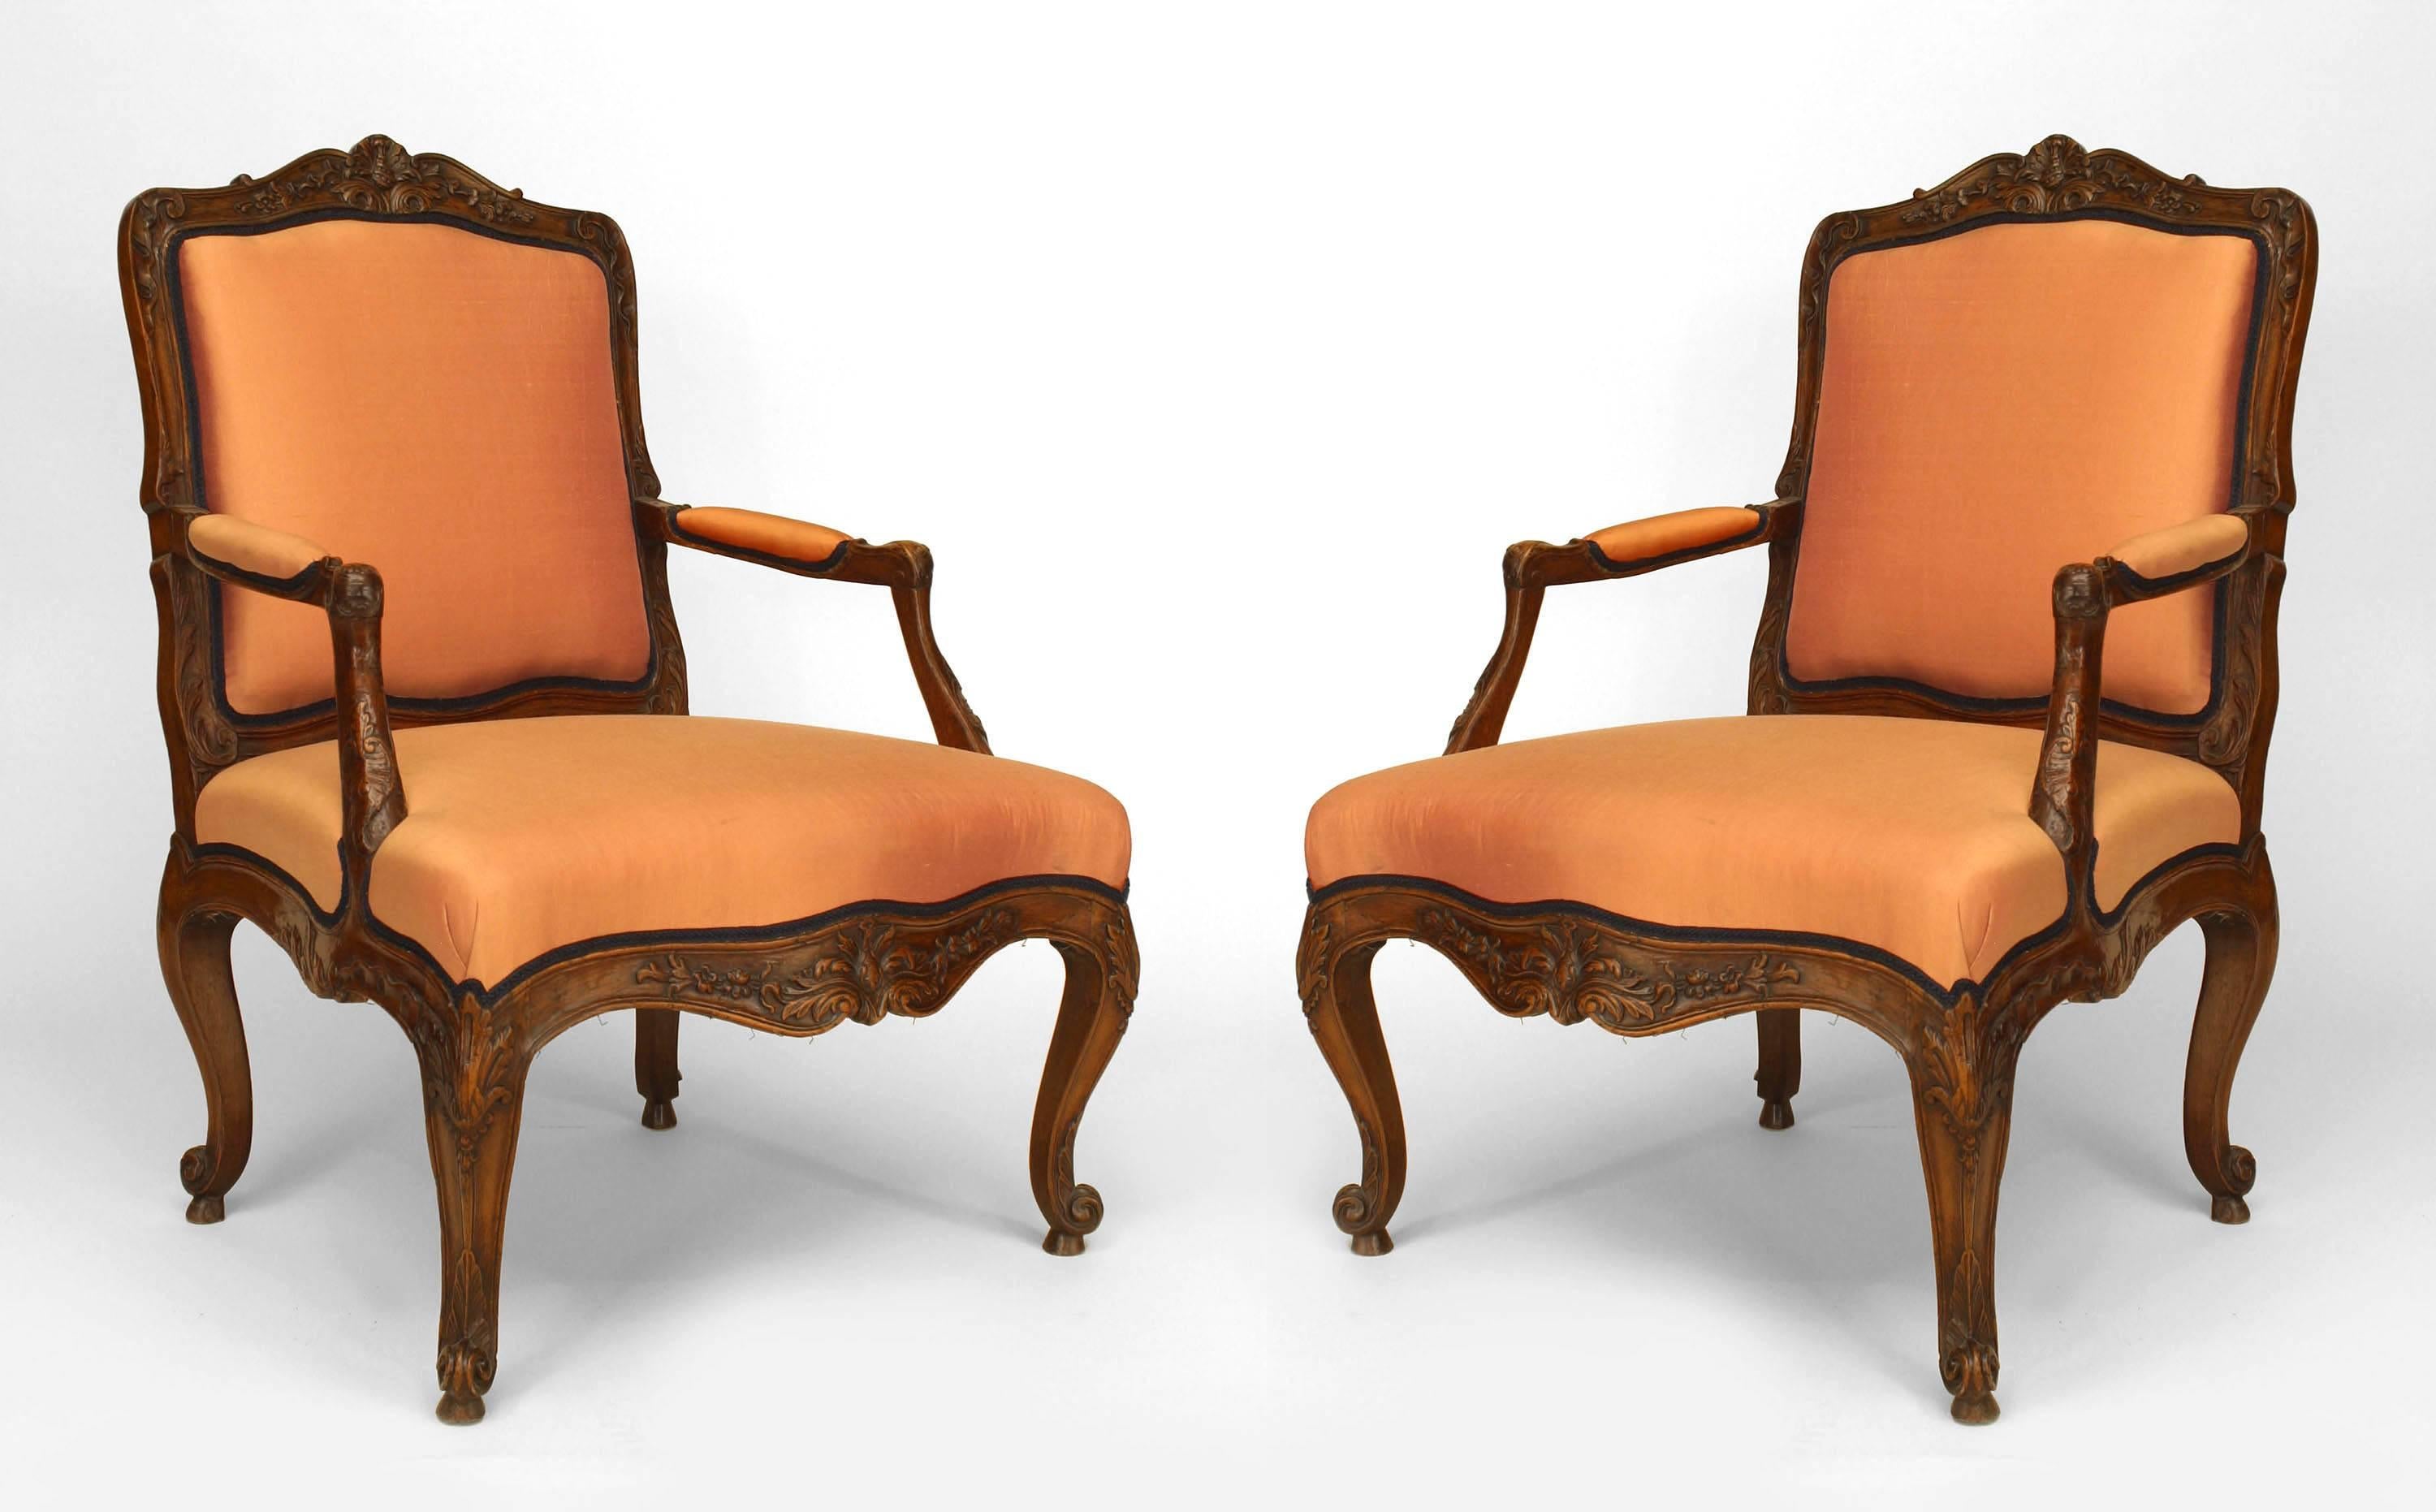 Pair of French Louis XV style (19th Cent) walnut carved open Armchairs with a shaped back and pink upholstered seat and back
